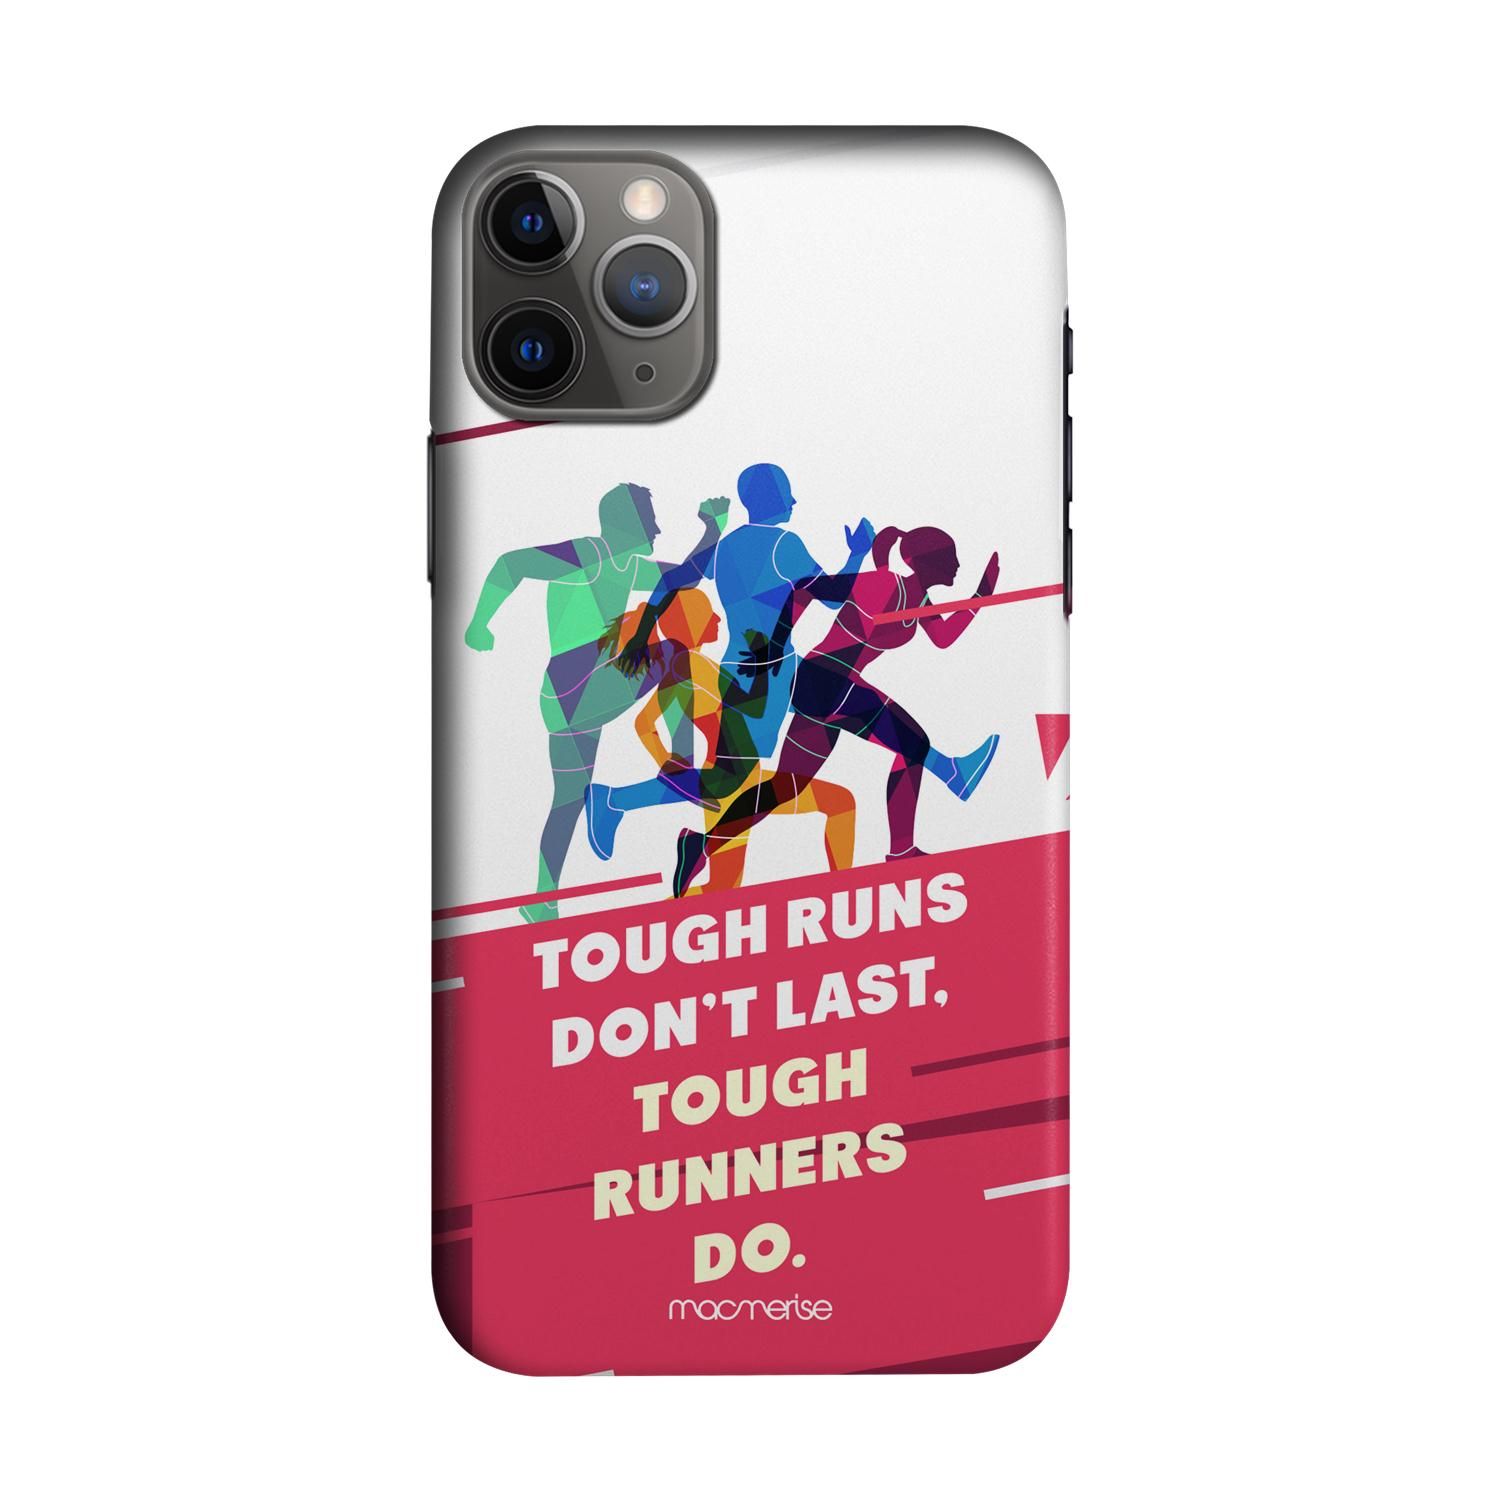 Buy Tough Runners - Sleek Phone Case for iPhone 11 Pro Max Online